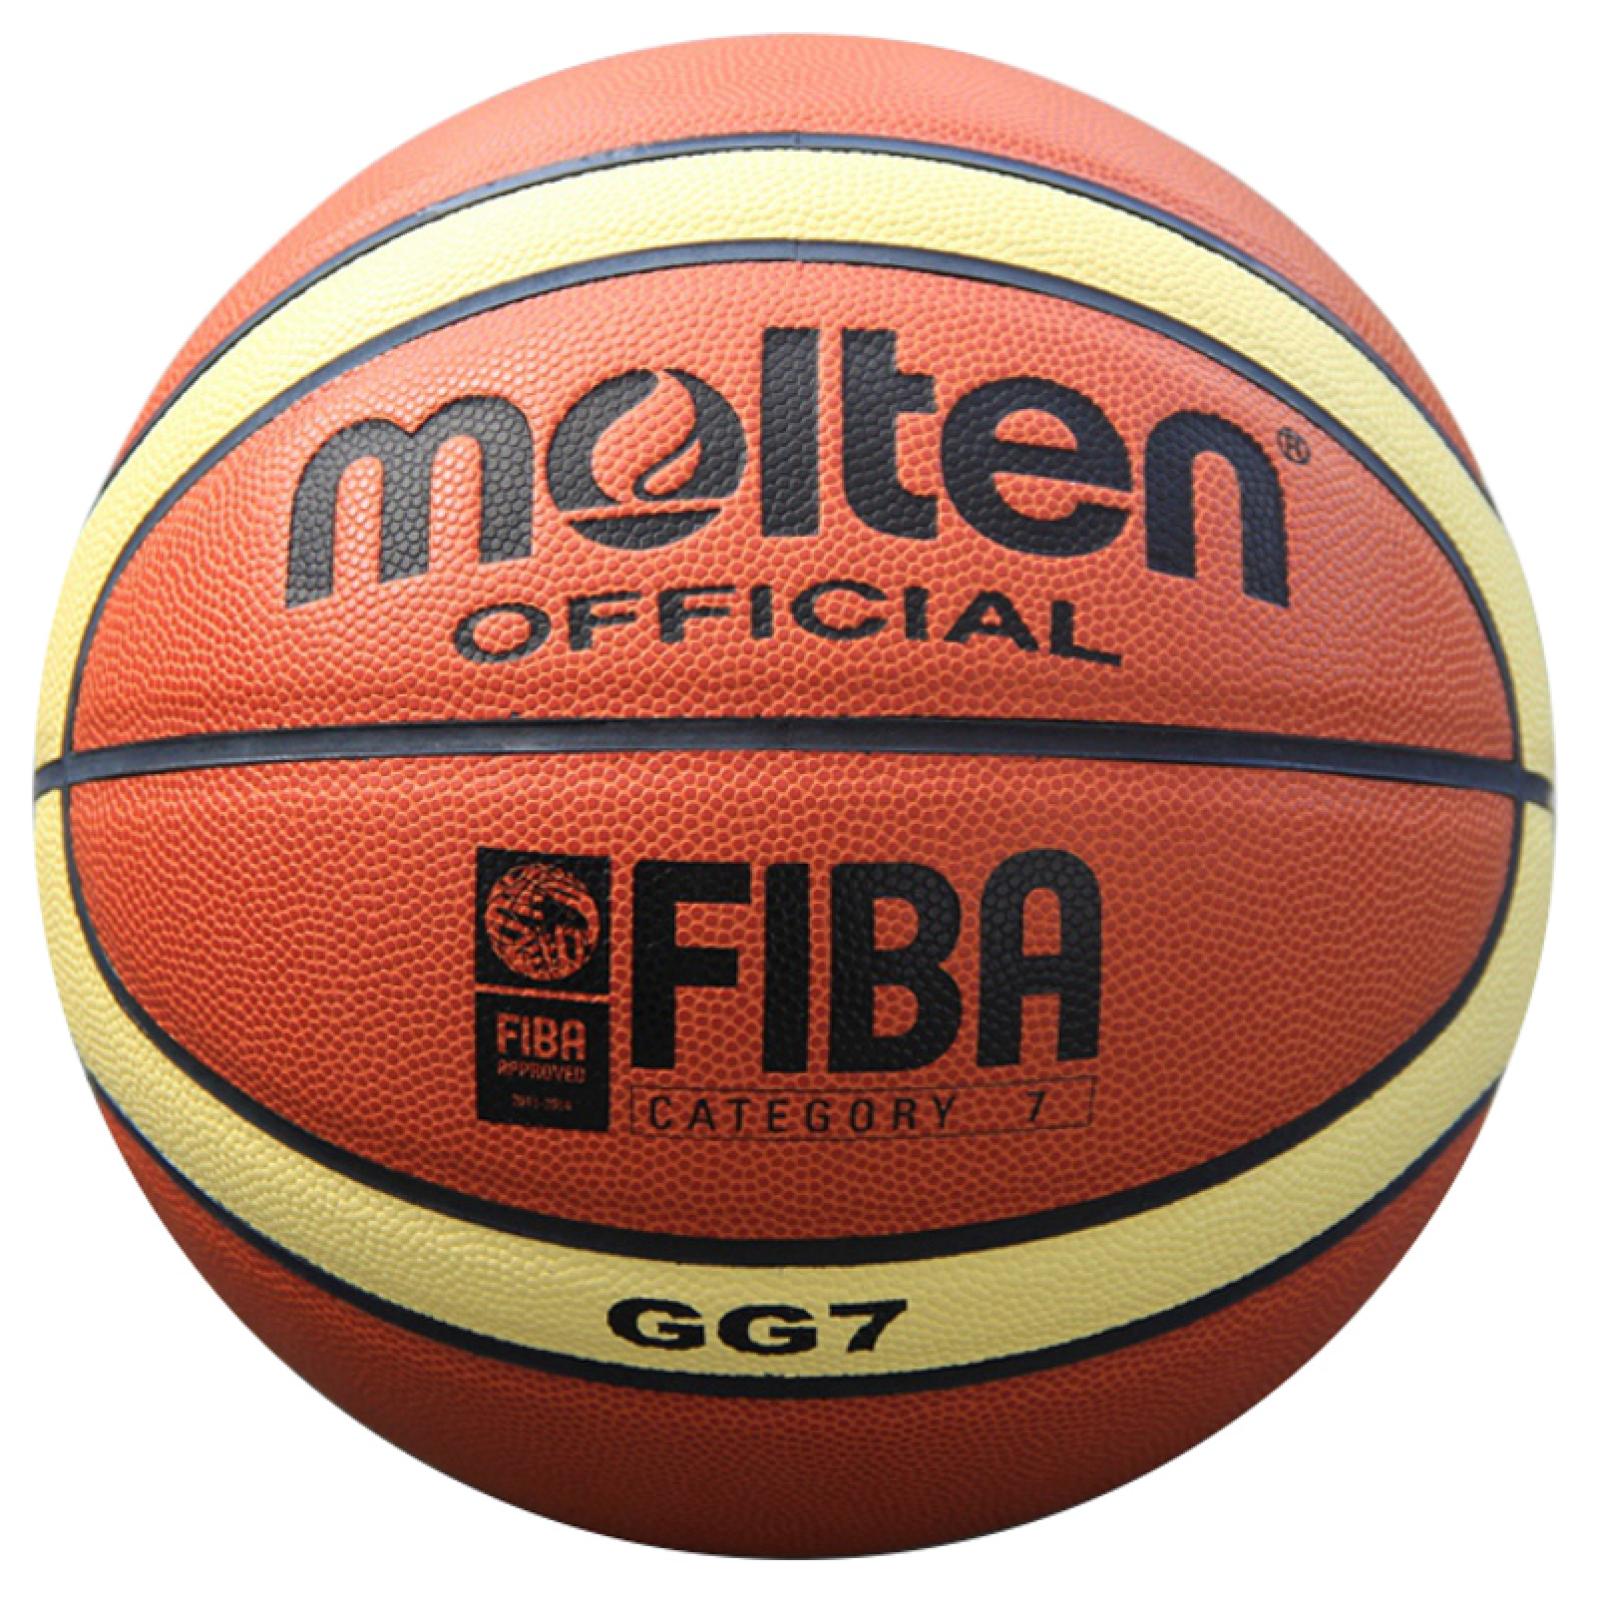 BGG7X Details about   NEW Molten GG7X Mens Basketball FIBA Approved Indoor Outdoor Performance 